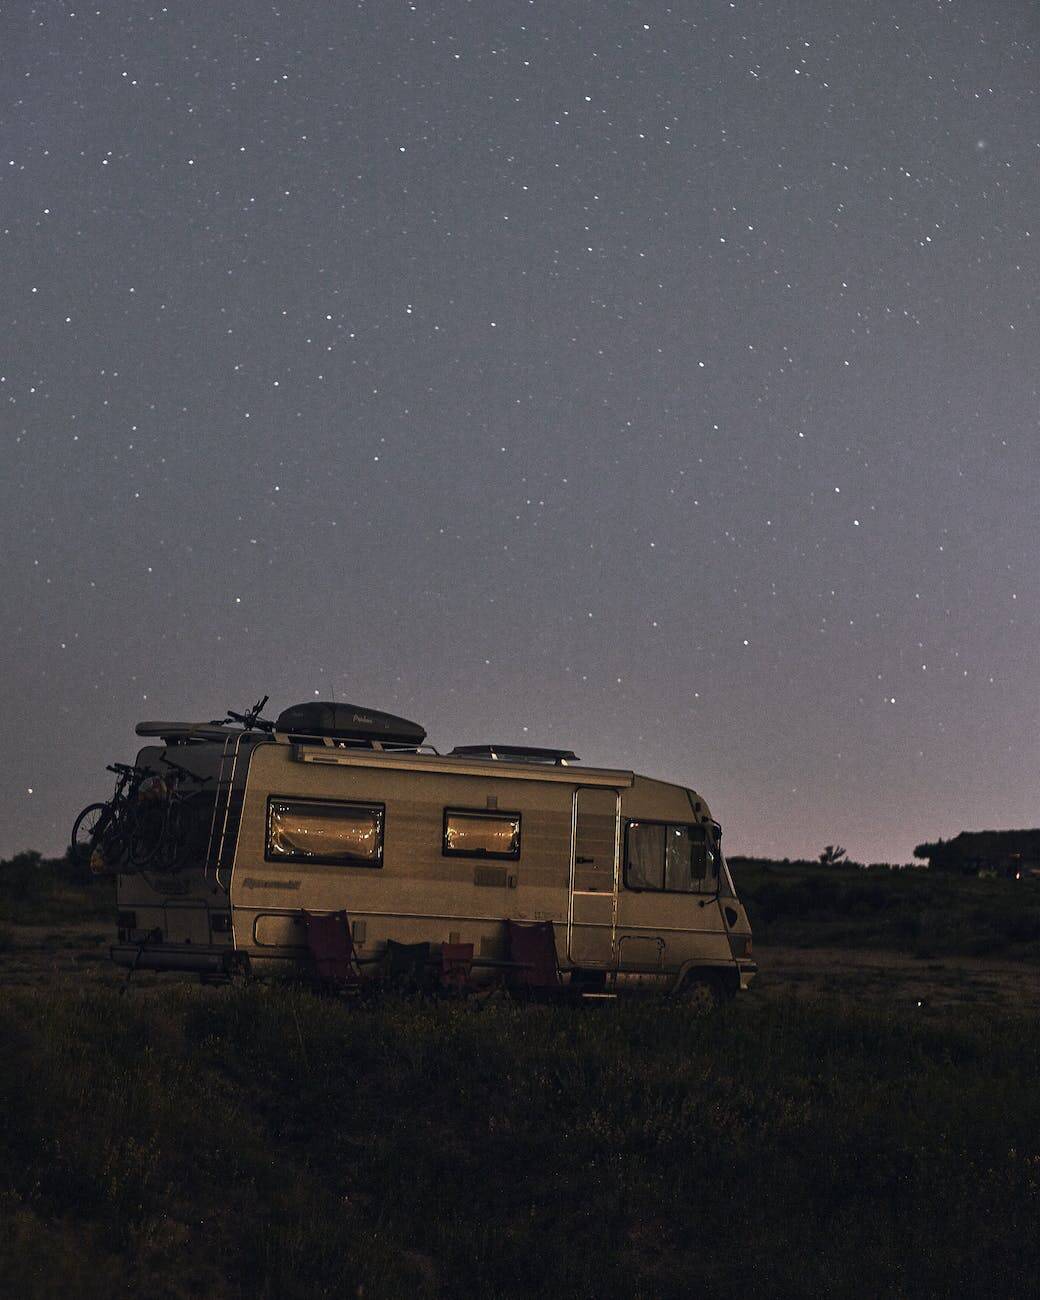 a mobile home under a starry night sky